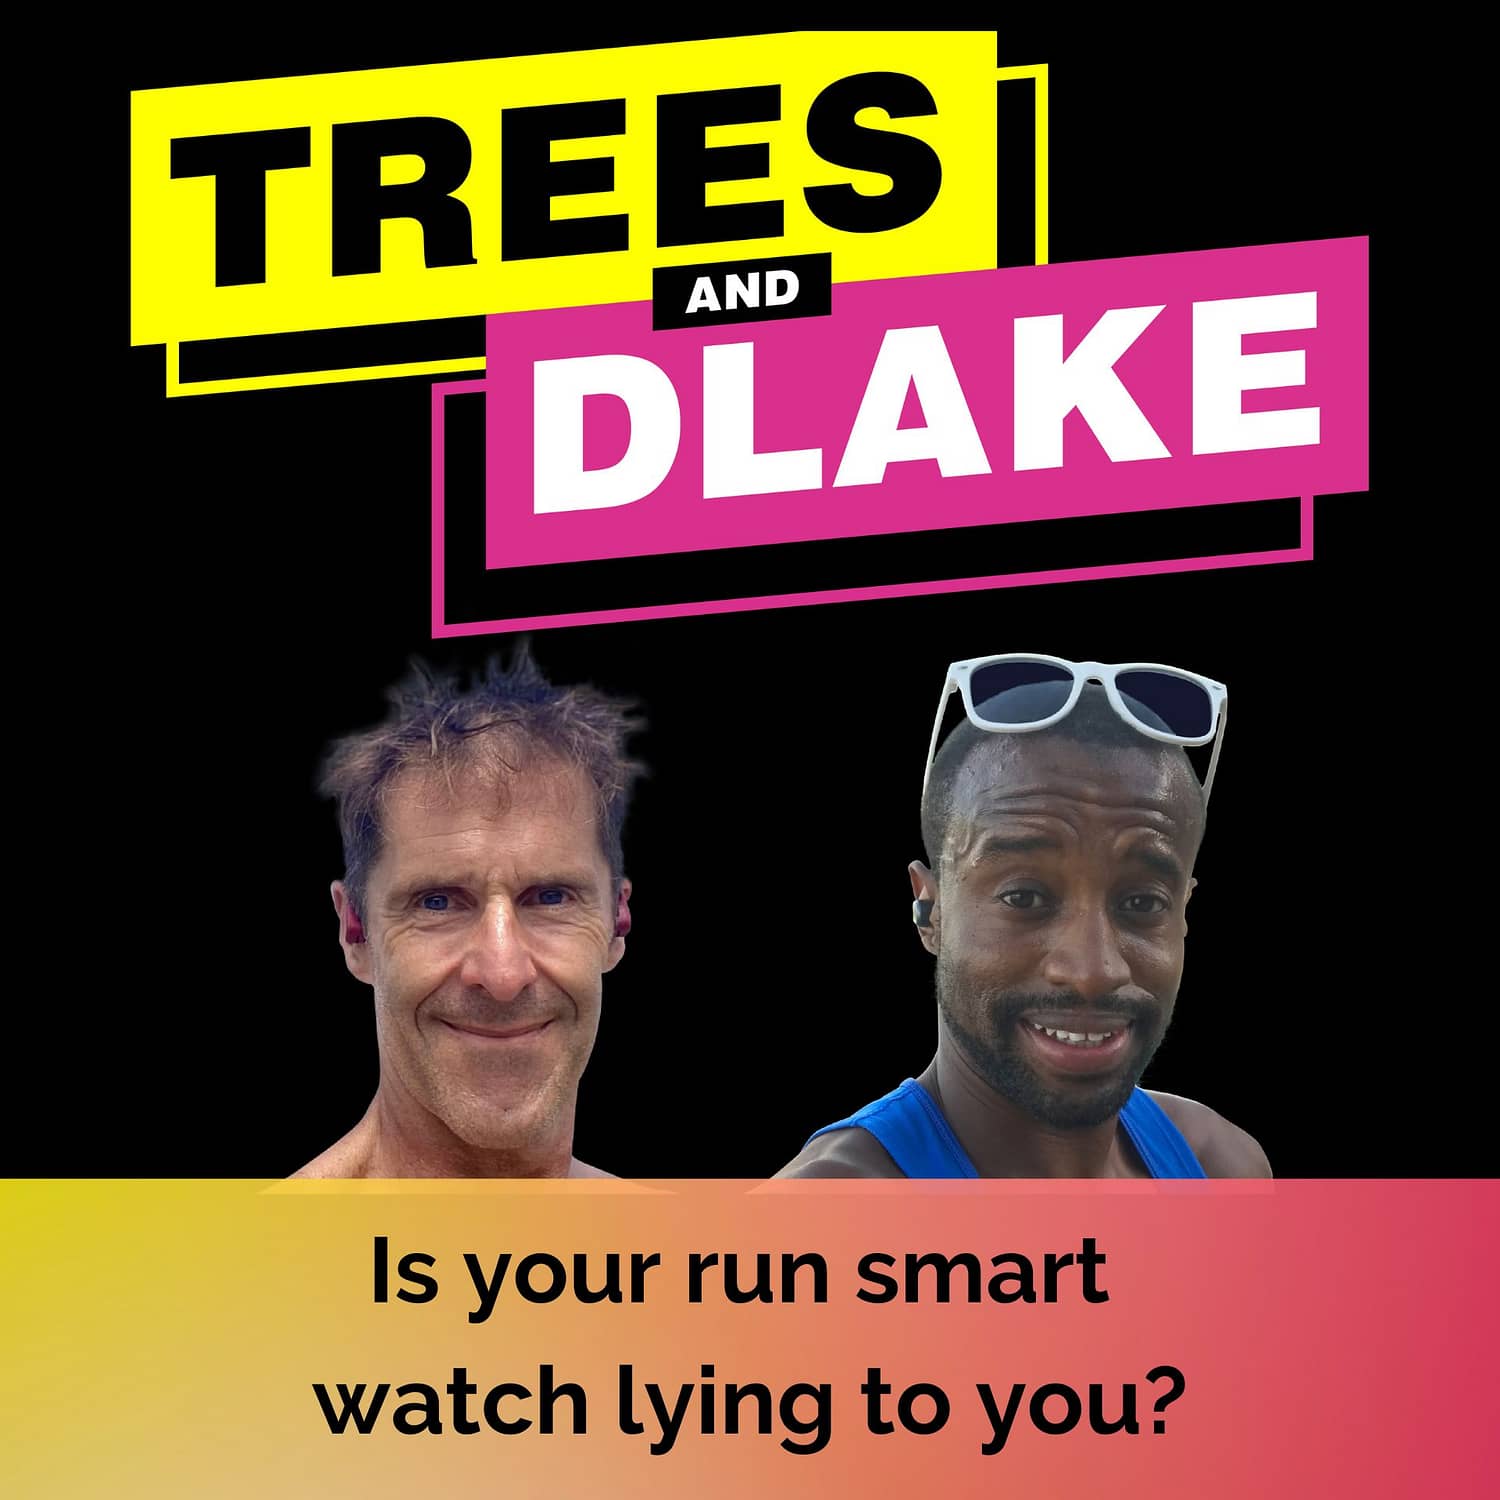 trees dlake episode artwork - is your smart watch lying to you